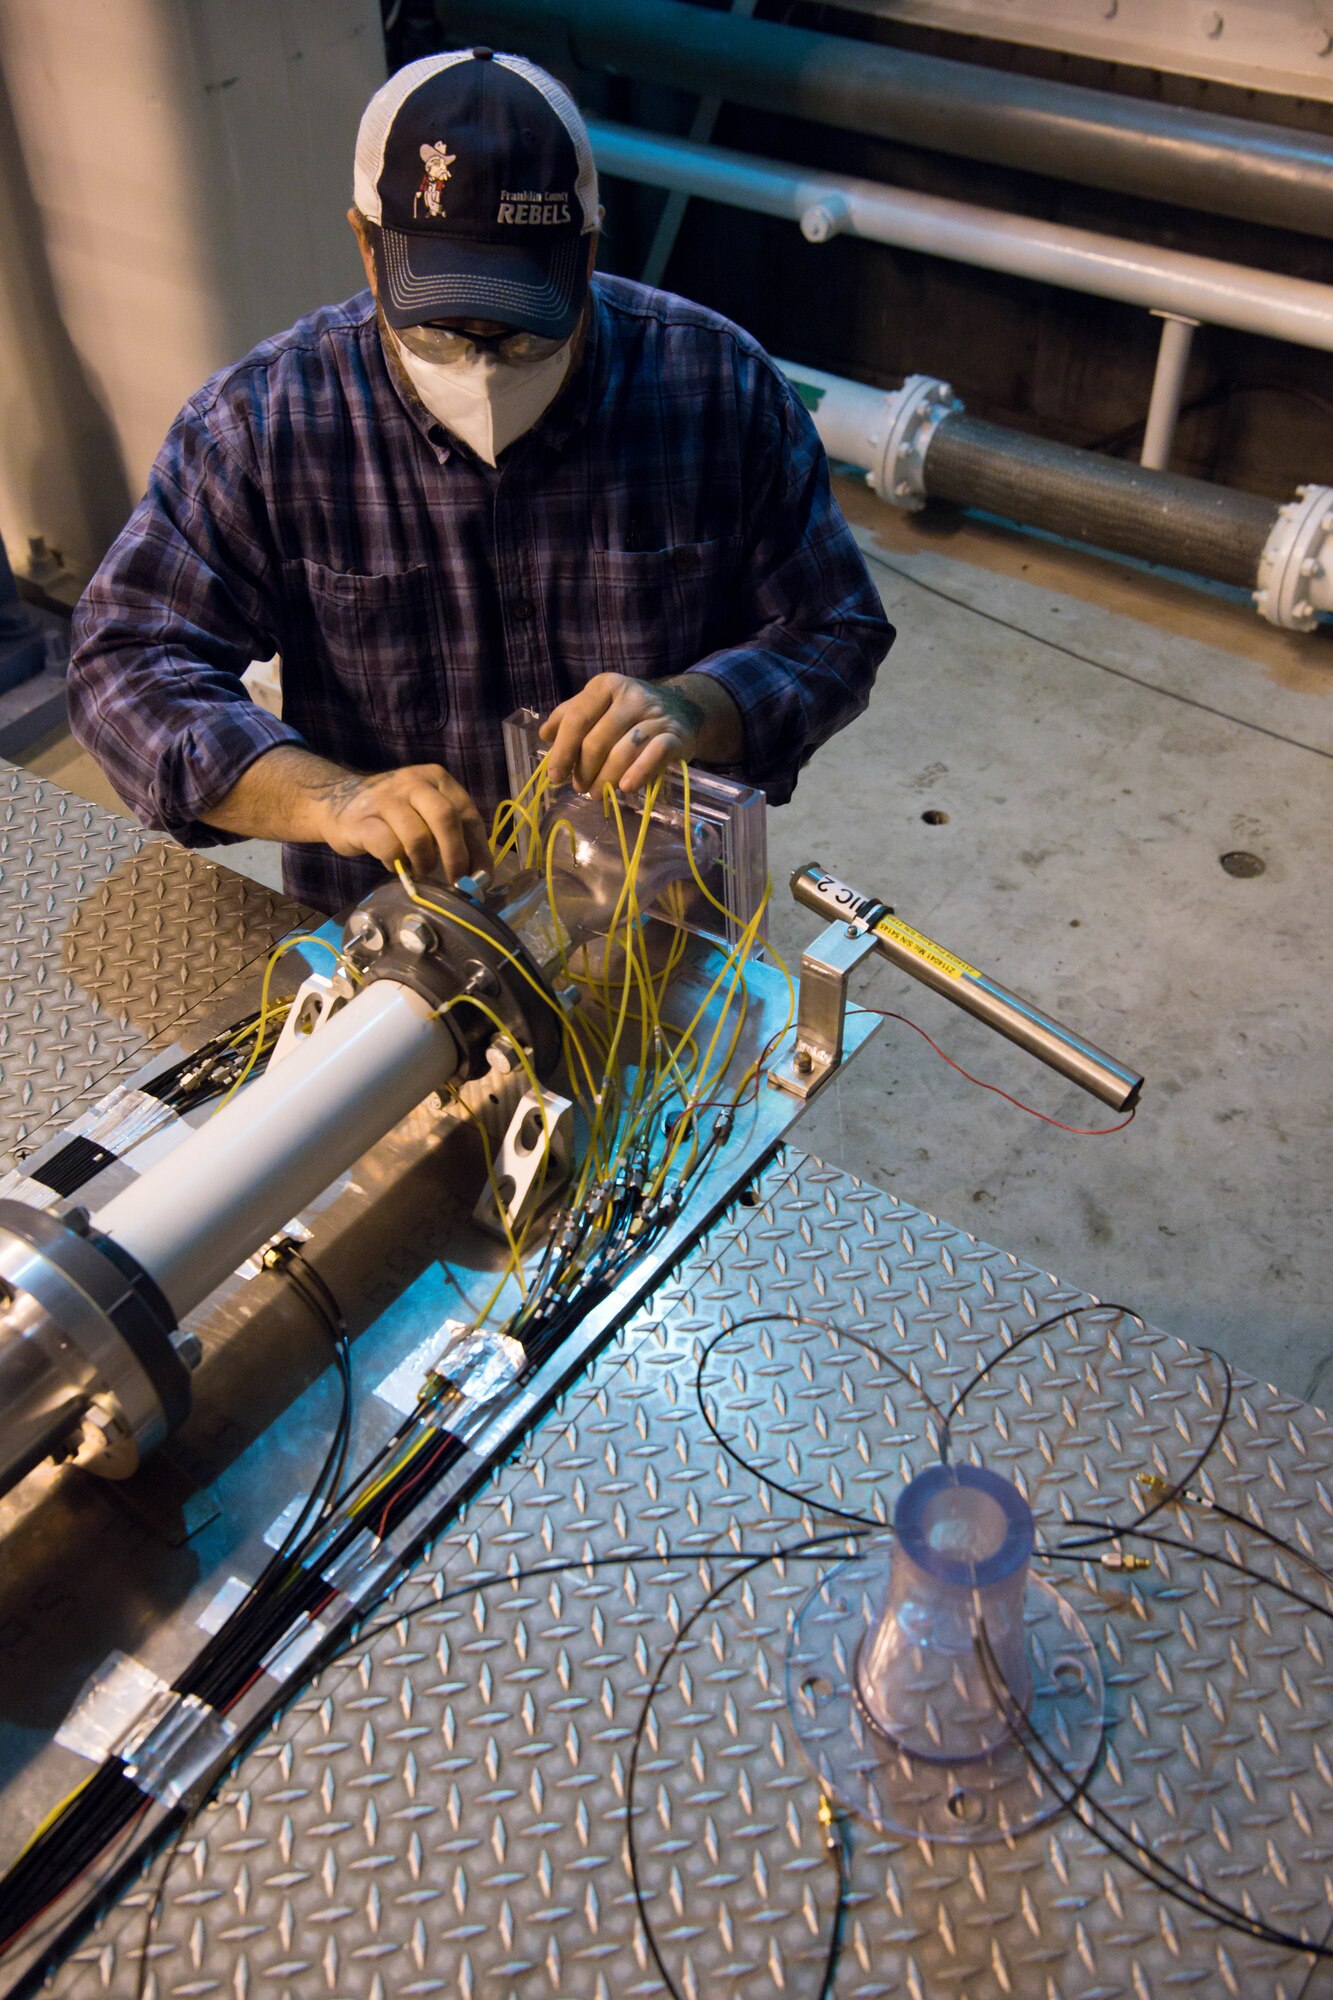 Alan Womack, machinist lead, disconnects instrumentation while preparing to swap out nozzles on a test stand in the Sea Level 2 Test Cell, Dec. 17, 2020, at Arnold Air Force Base, Tenn. The second nozzle that was tested is seen in the foreground. An Arnold Engineering Development Complex test team was investigating the acoustic properties of the nozzles. (U.S. Air Force photo by Jill Pickett)